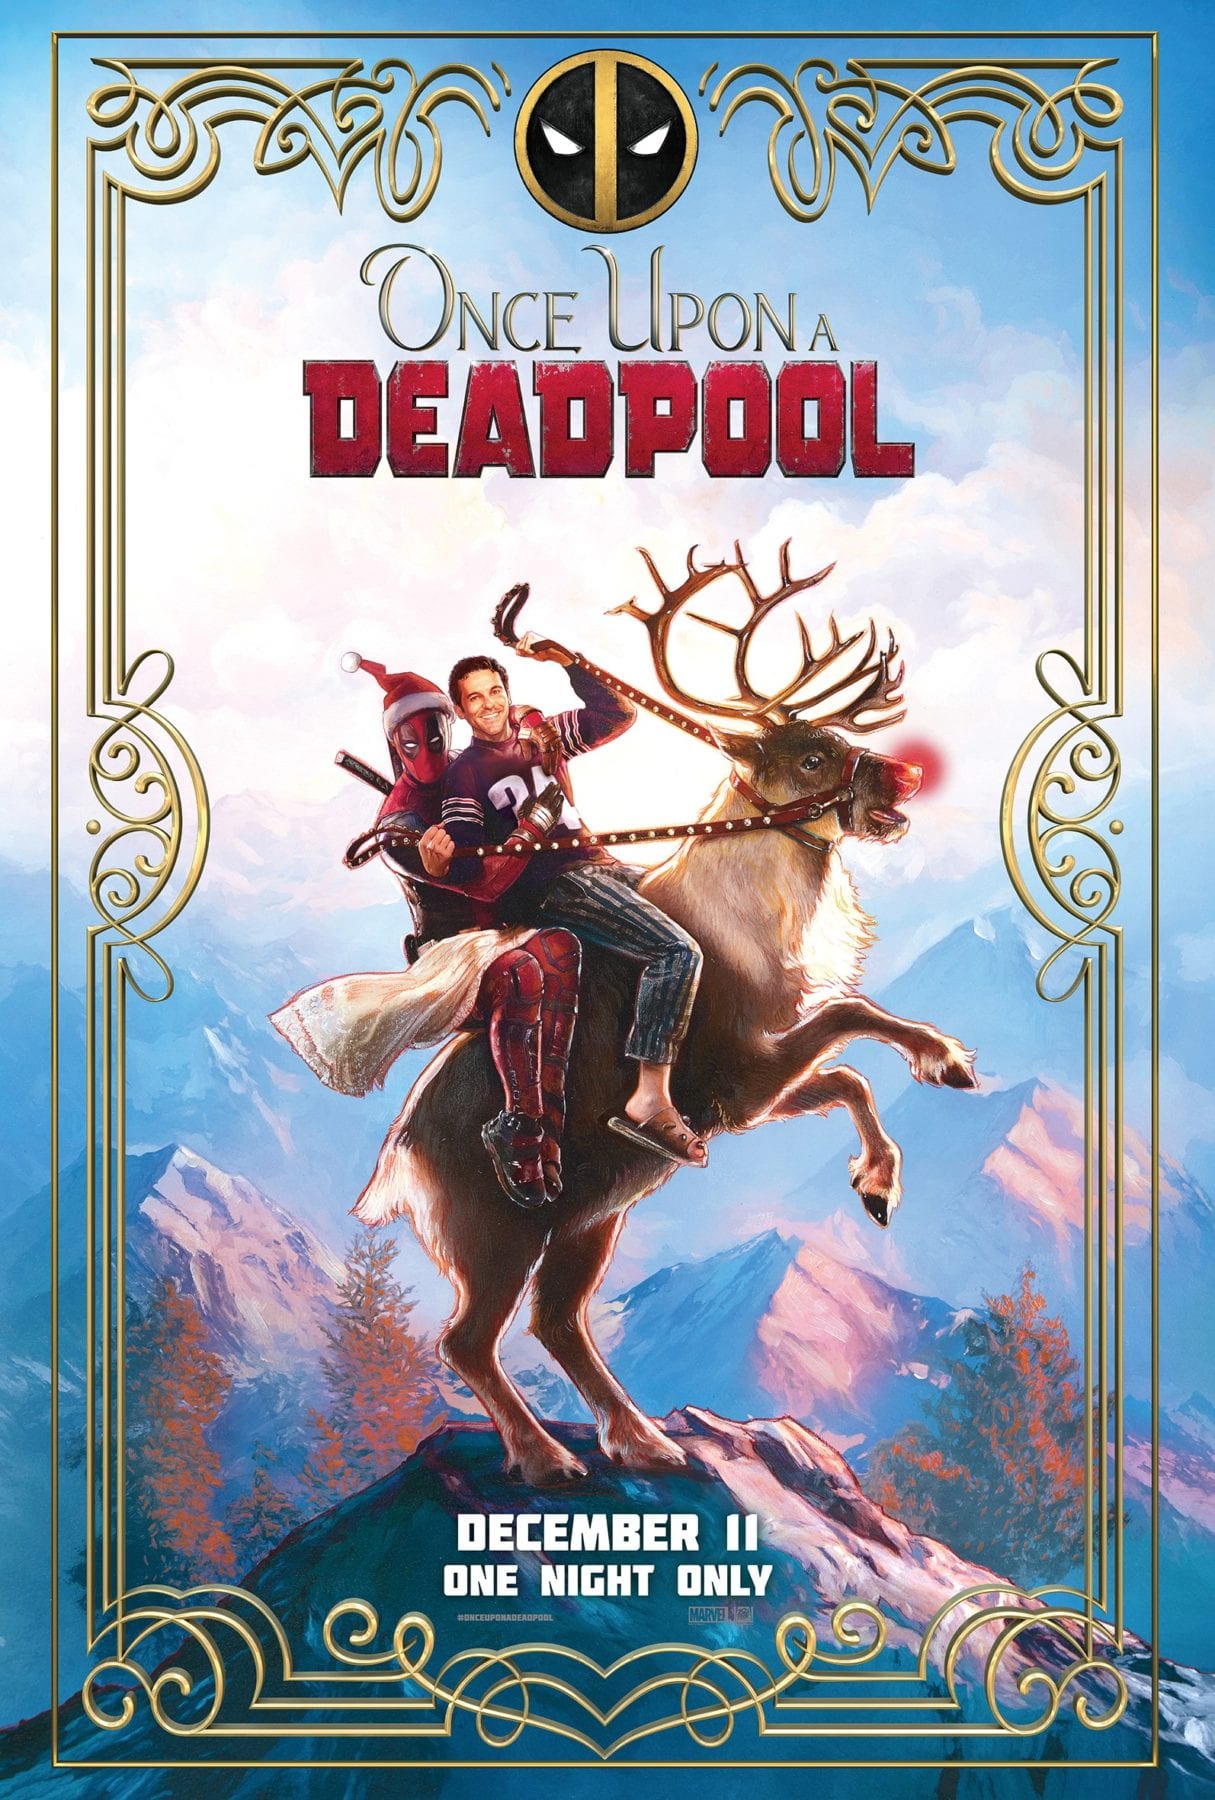 2018 Once Upon A Deadpool